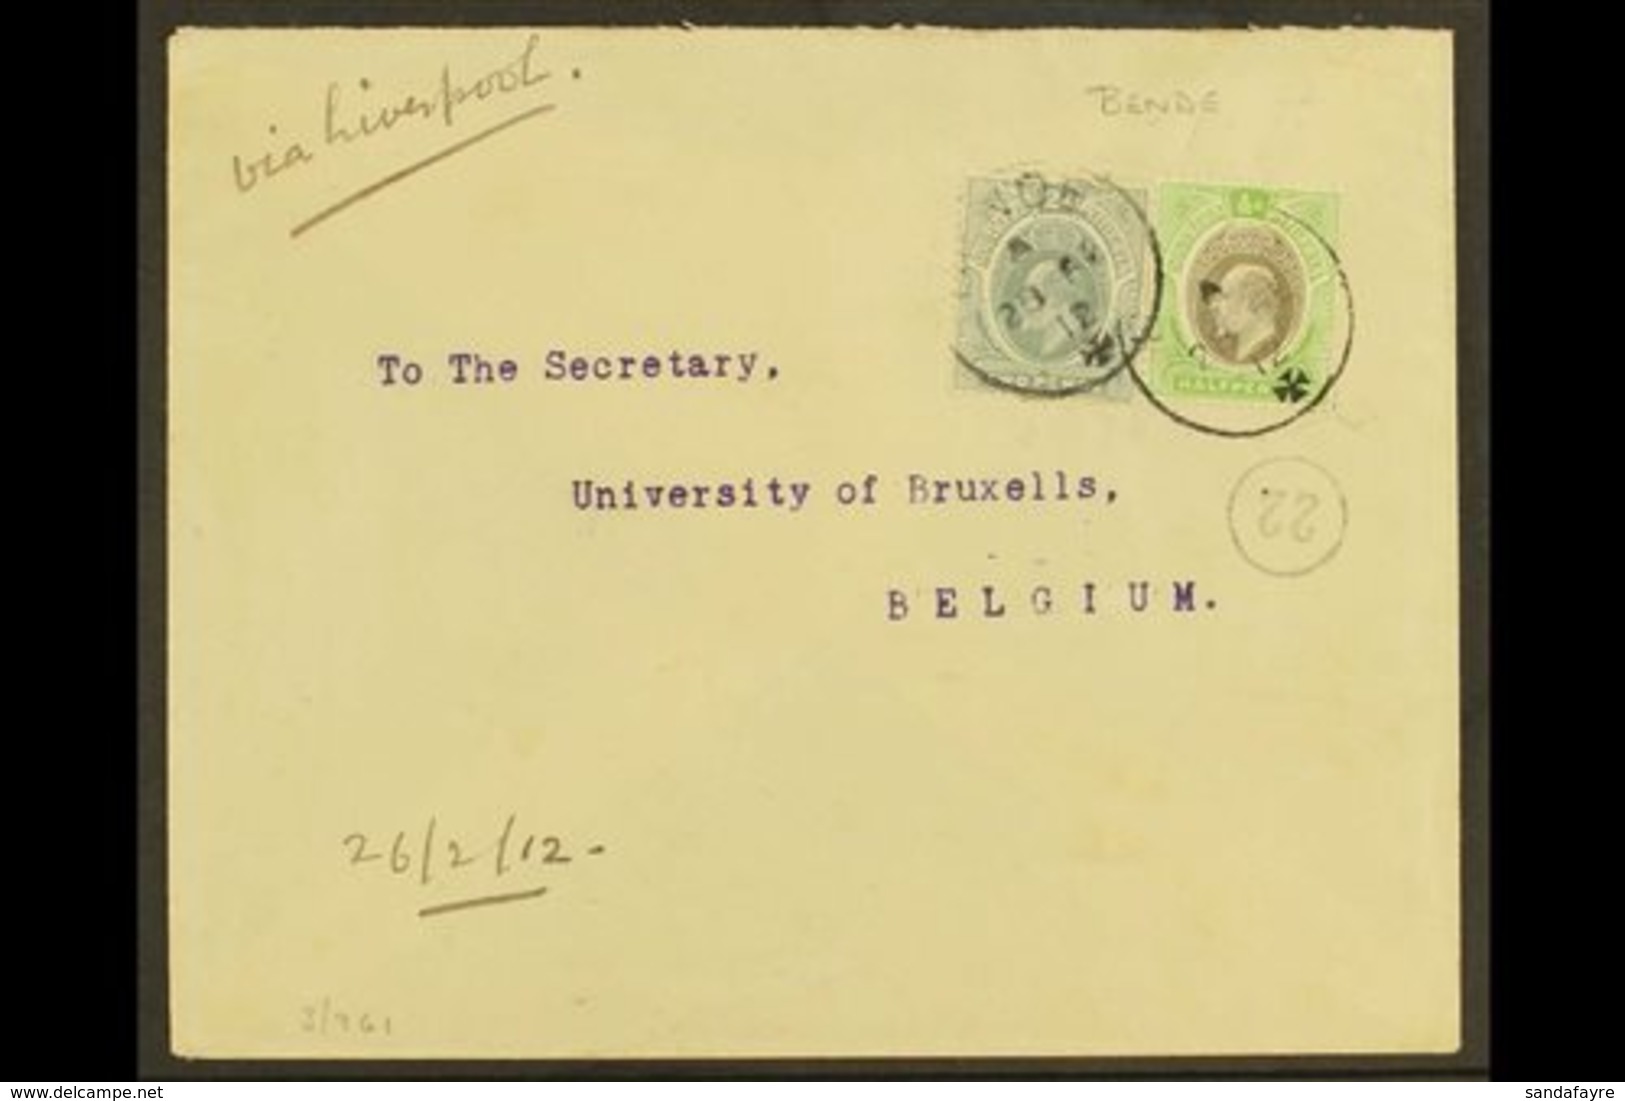 1912  Cover To Brussels, Franked Ed VII ½d Green And Black And 2d Slate Tied By "Bende X" Cds Cancels With Calabar Trans - Nigeria (...-1960)